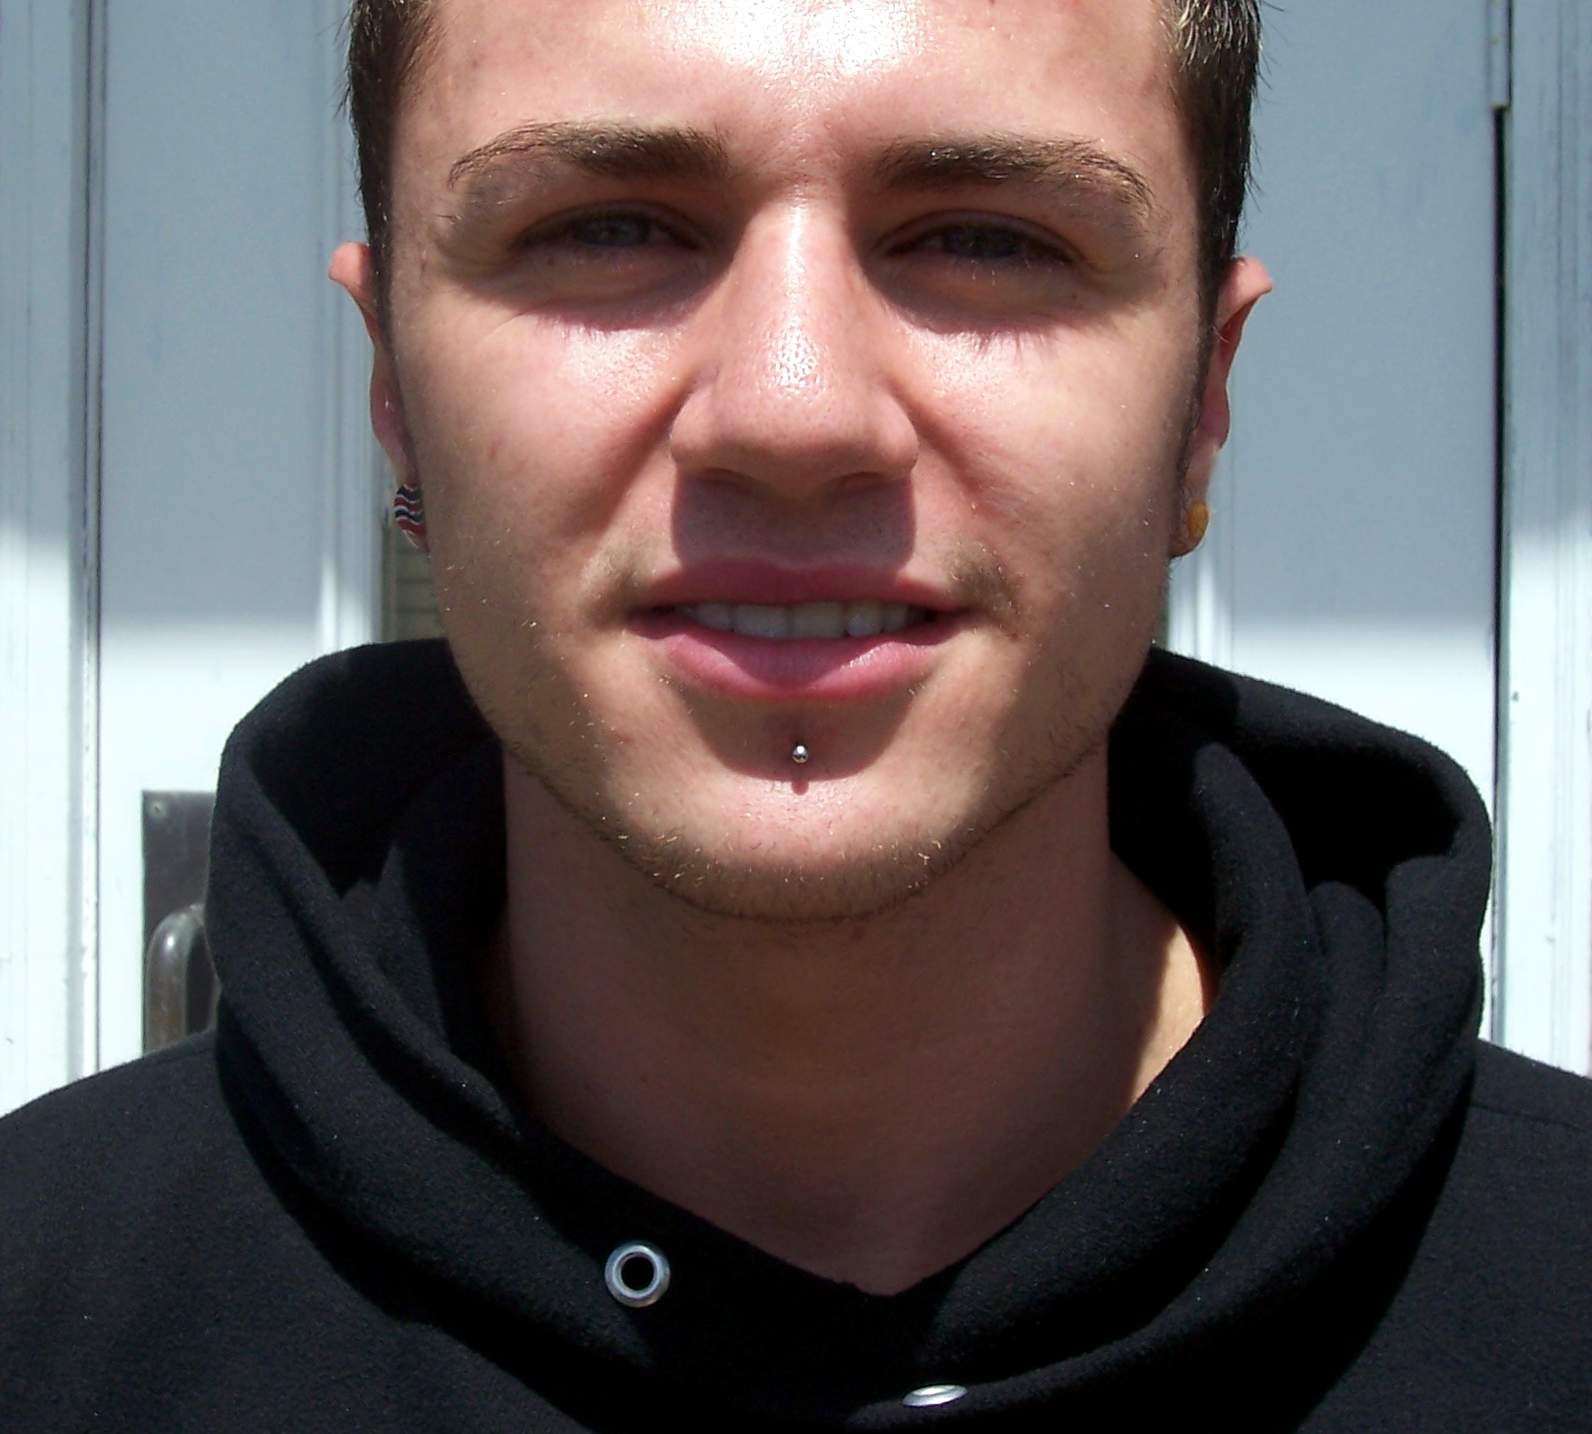 Man With Silver Stud Labret Piercing